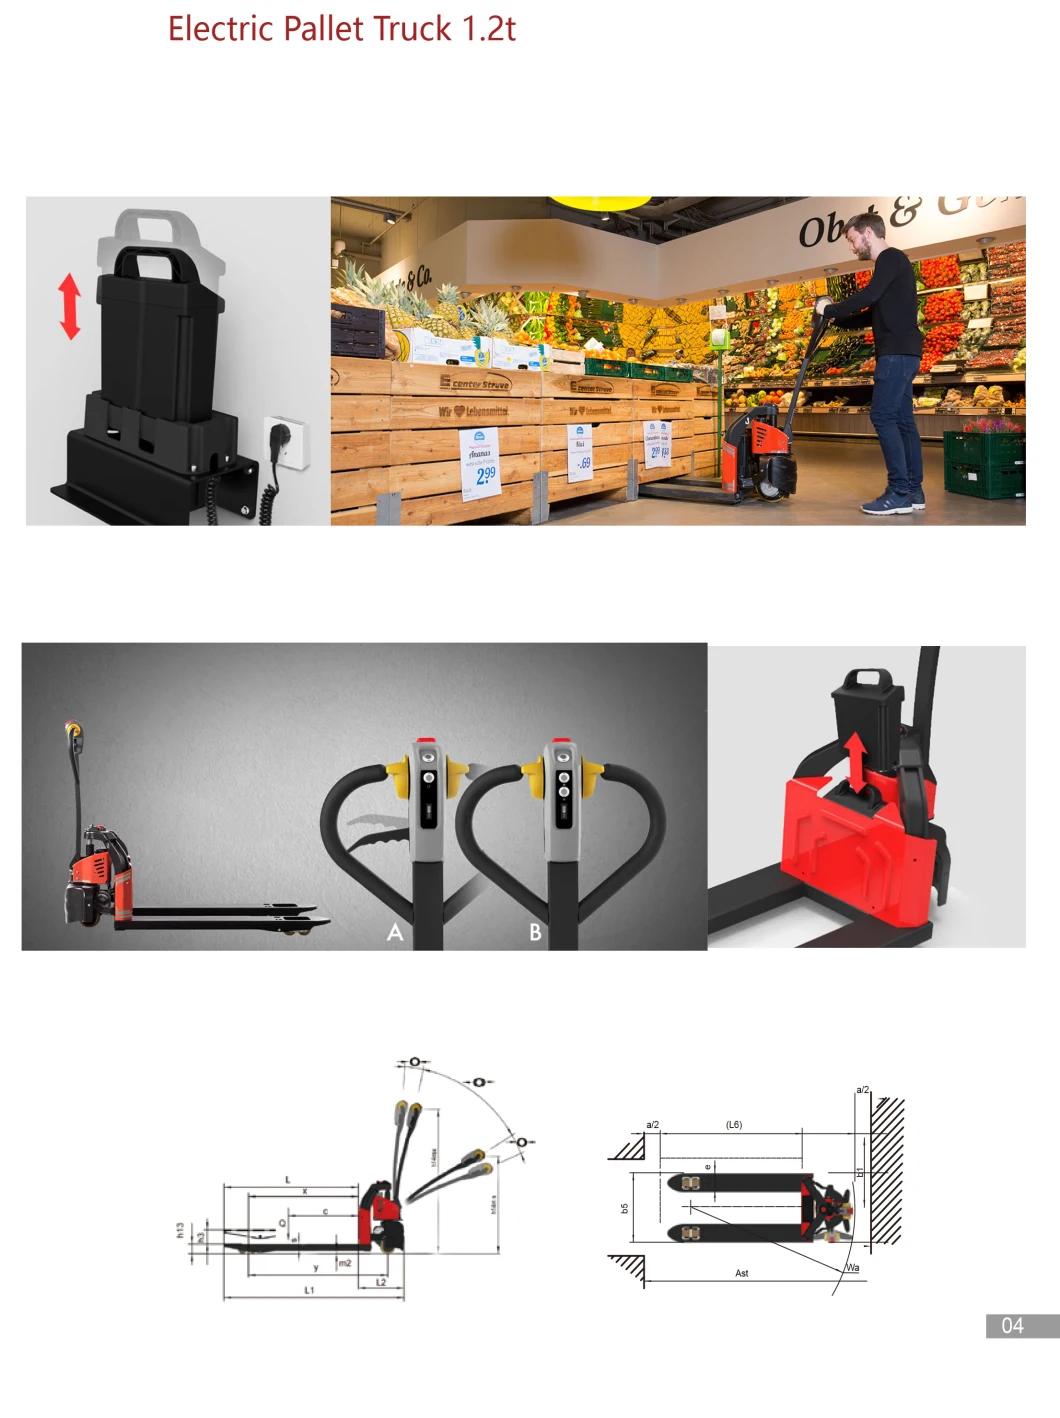 High Power 1.5-2.0 Ton DC/AC Motor Economical Battery Operated Electric Pallet Truck